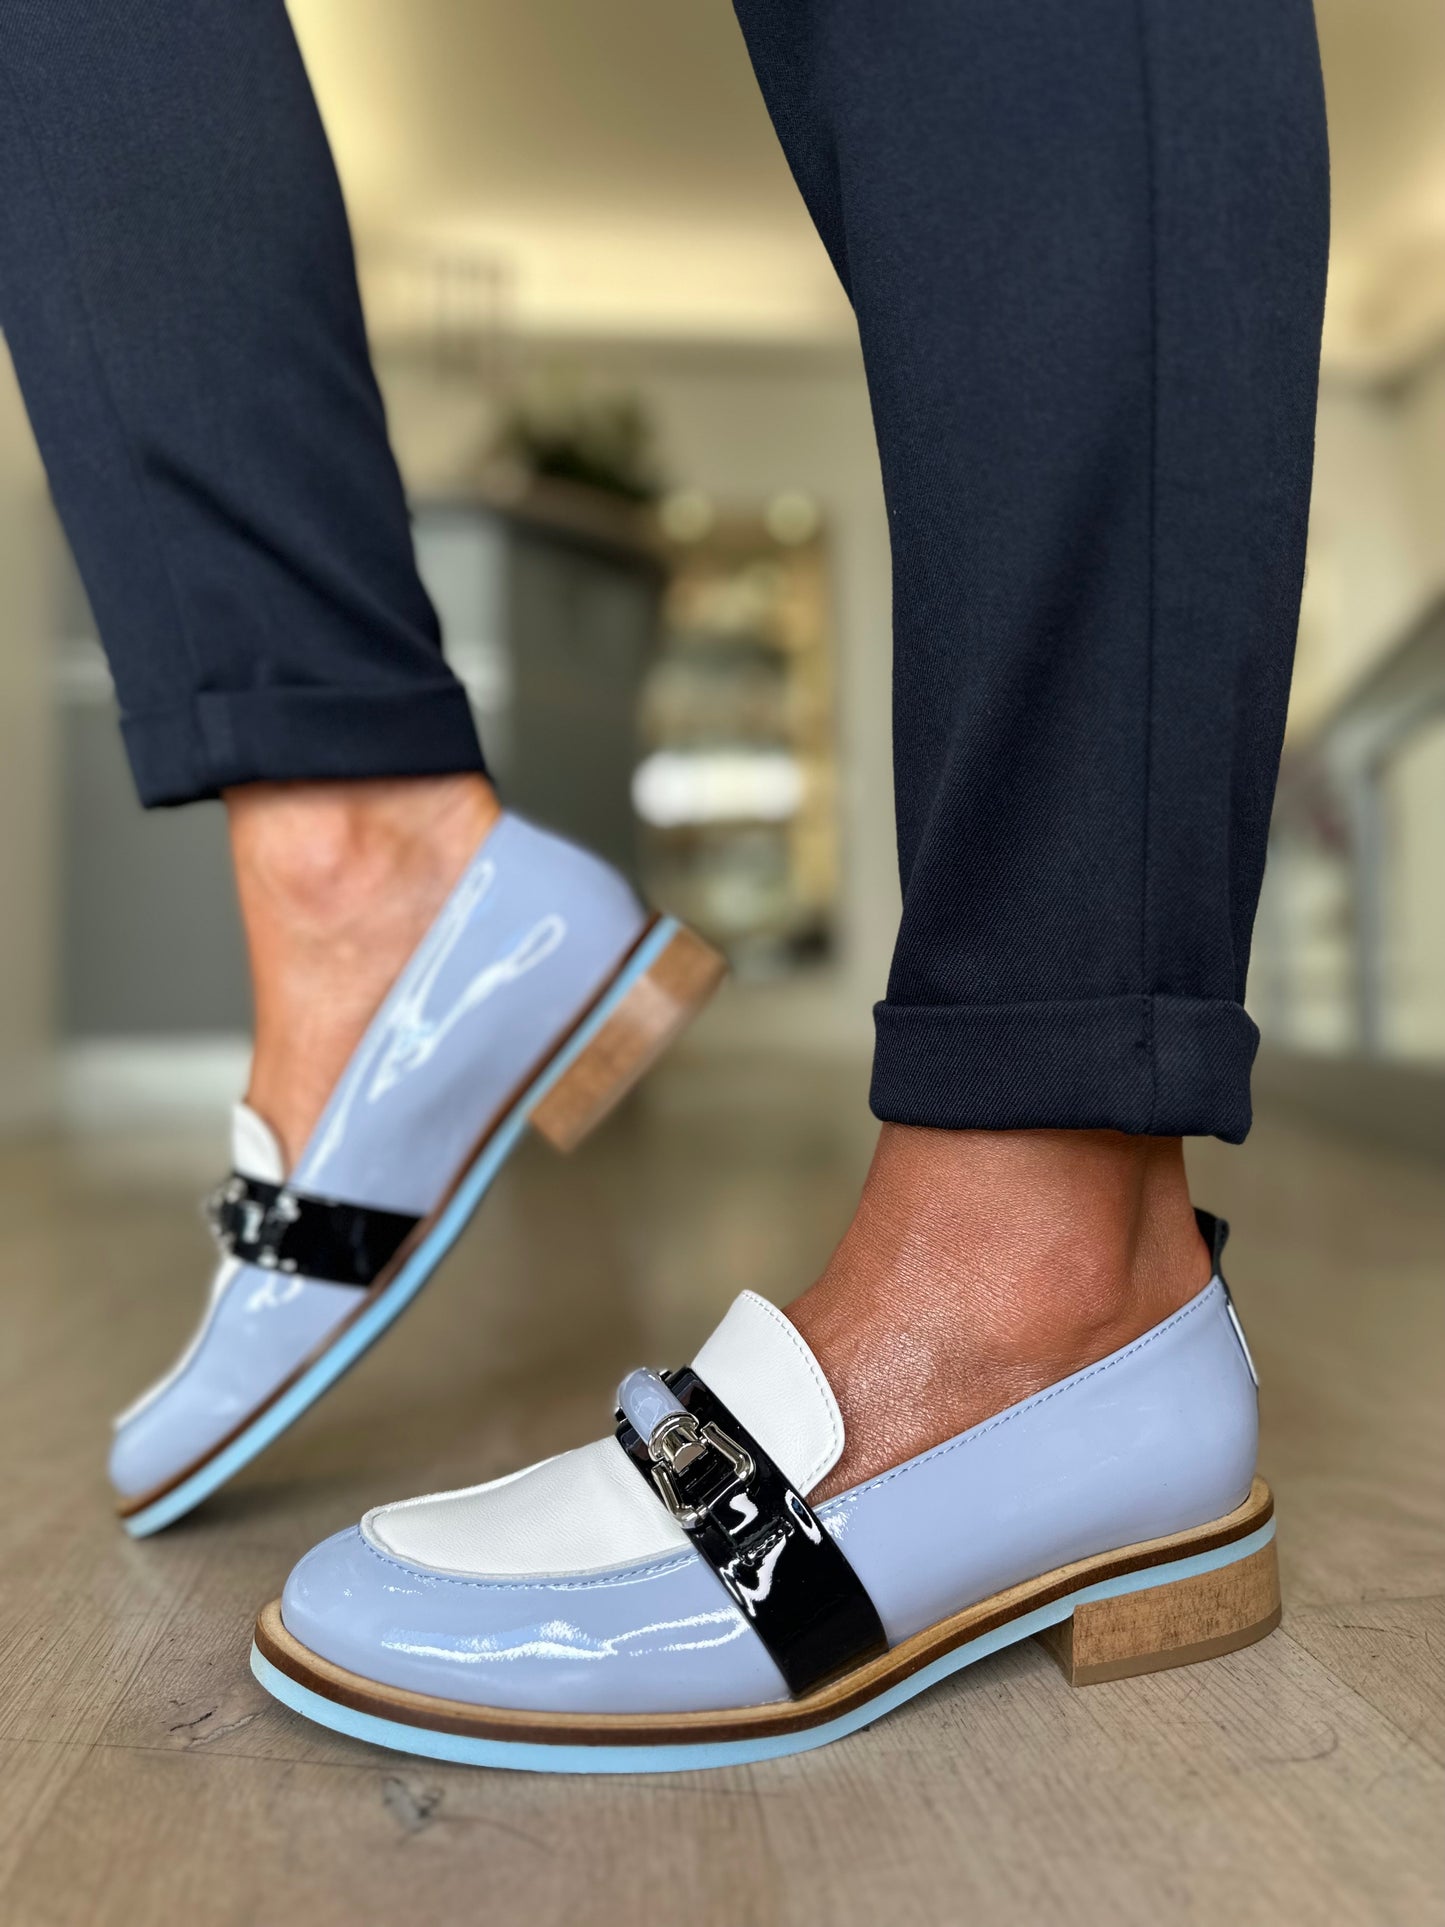 Marco Moreo - Pale Blue Patent Loafer With Dark Navy/White Patent Trim